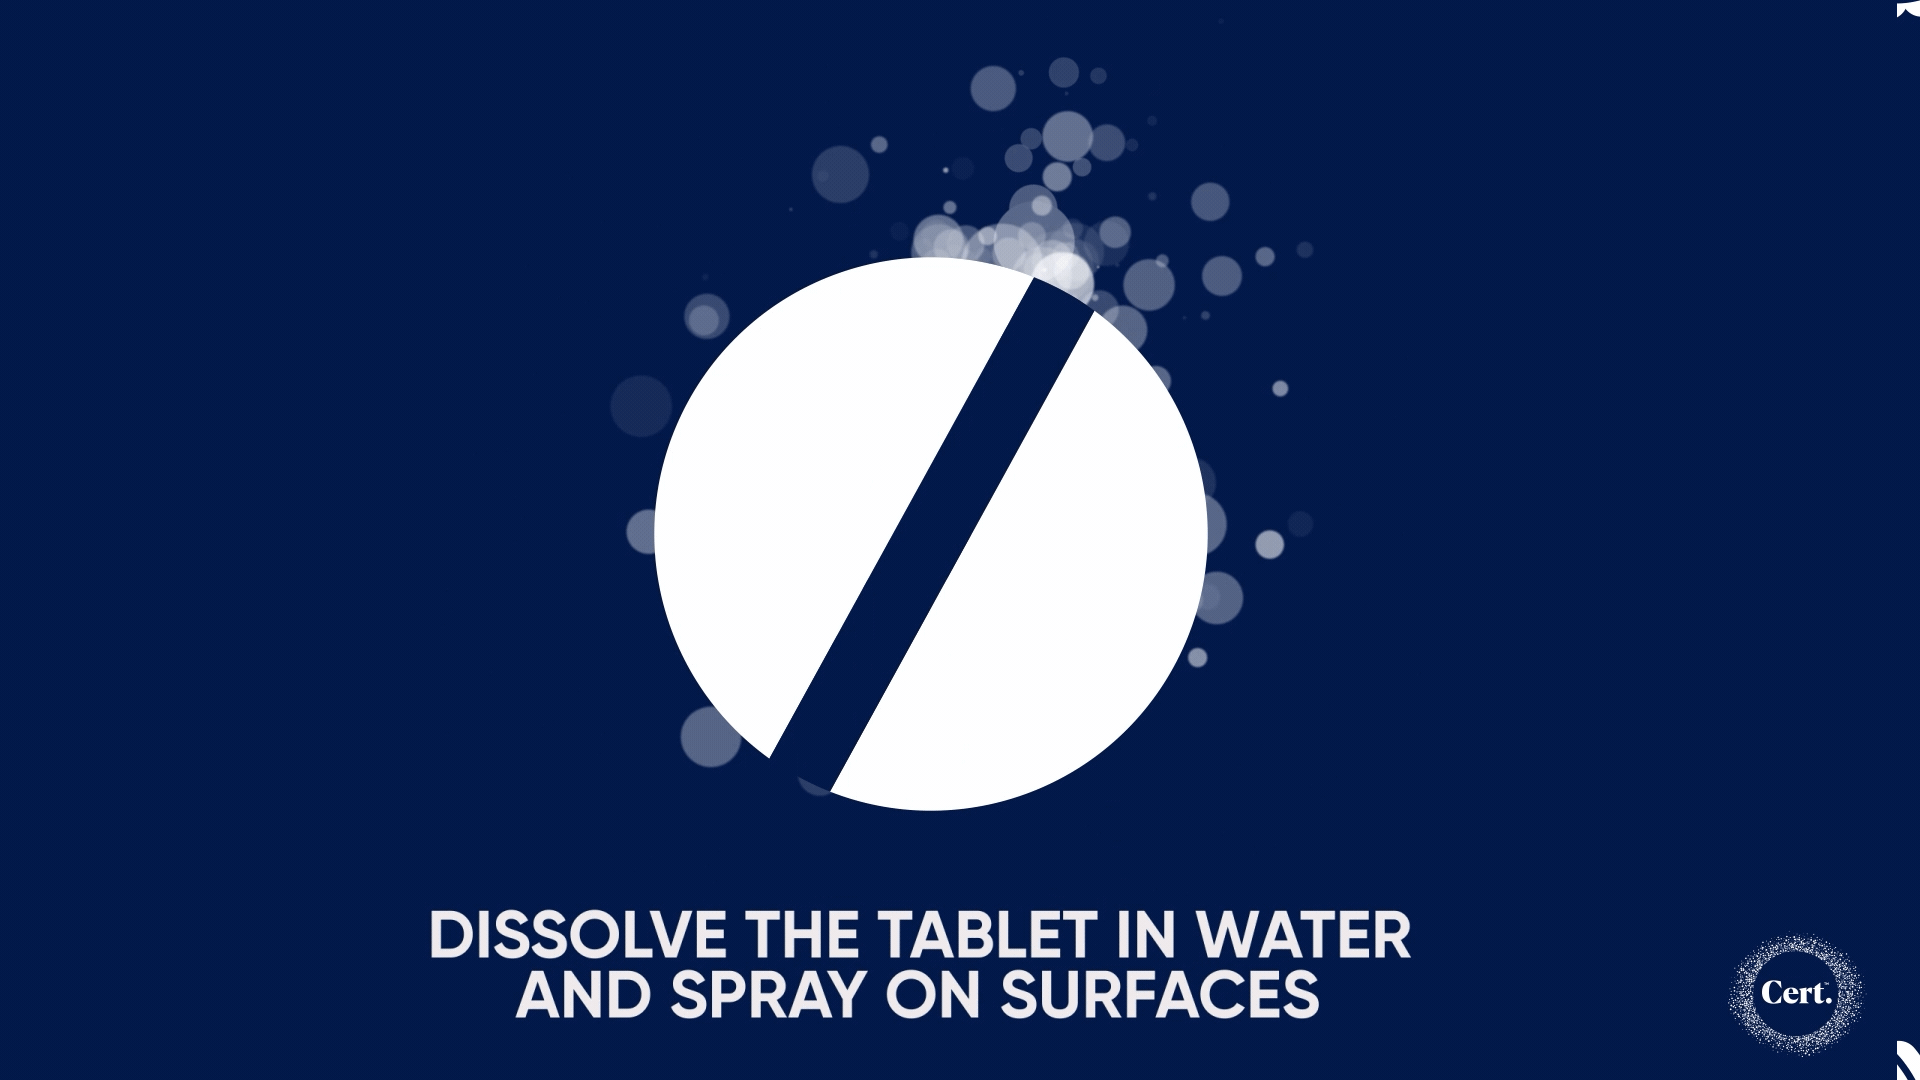 Dissolve the tablet in water and spray on surfaces